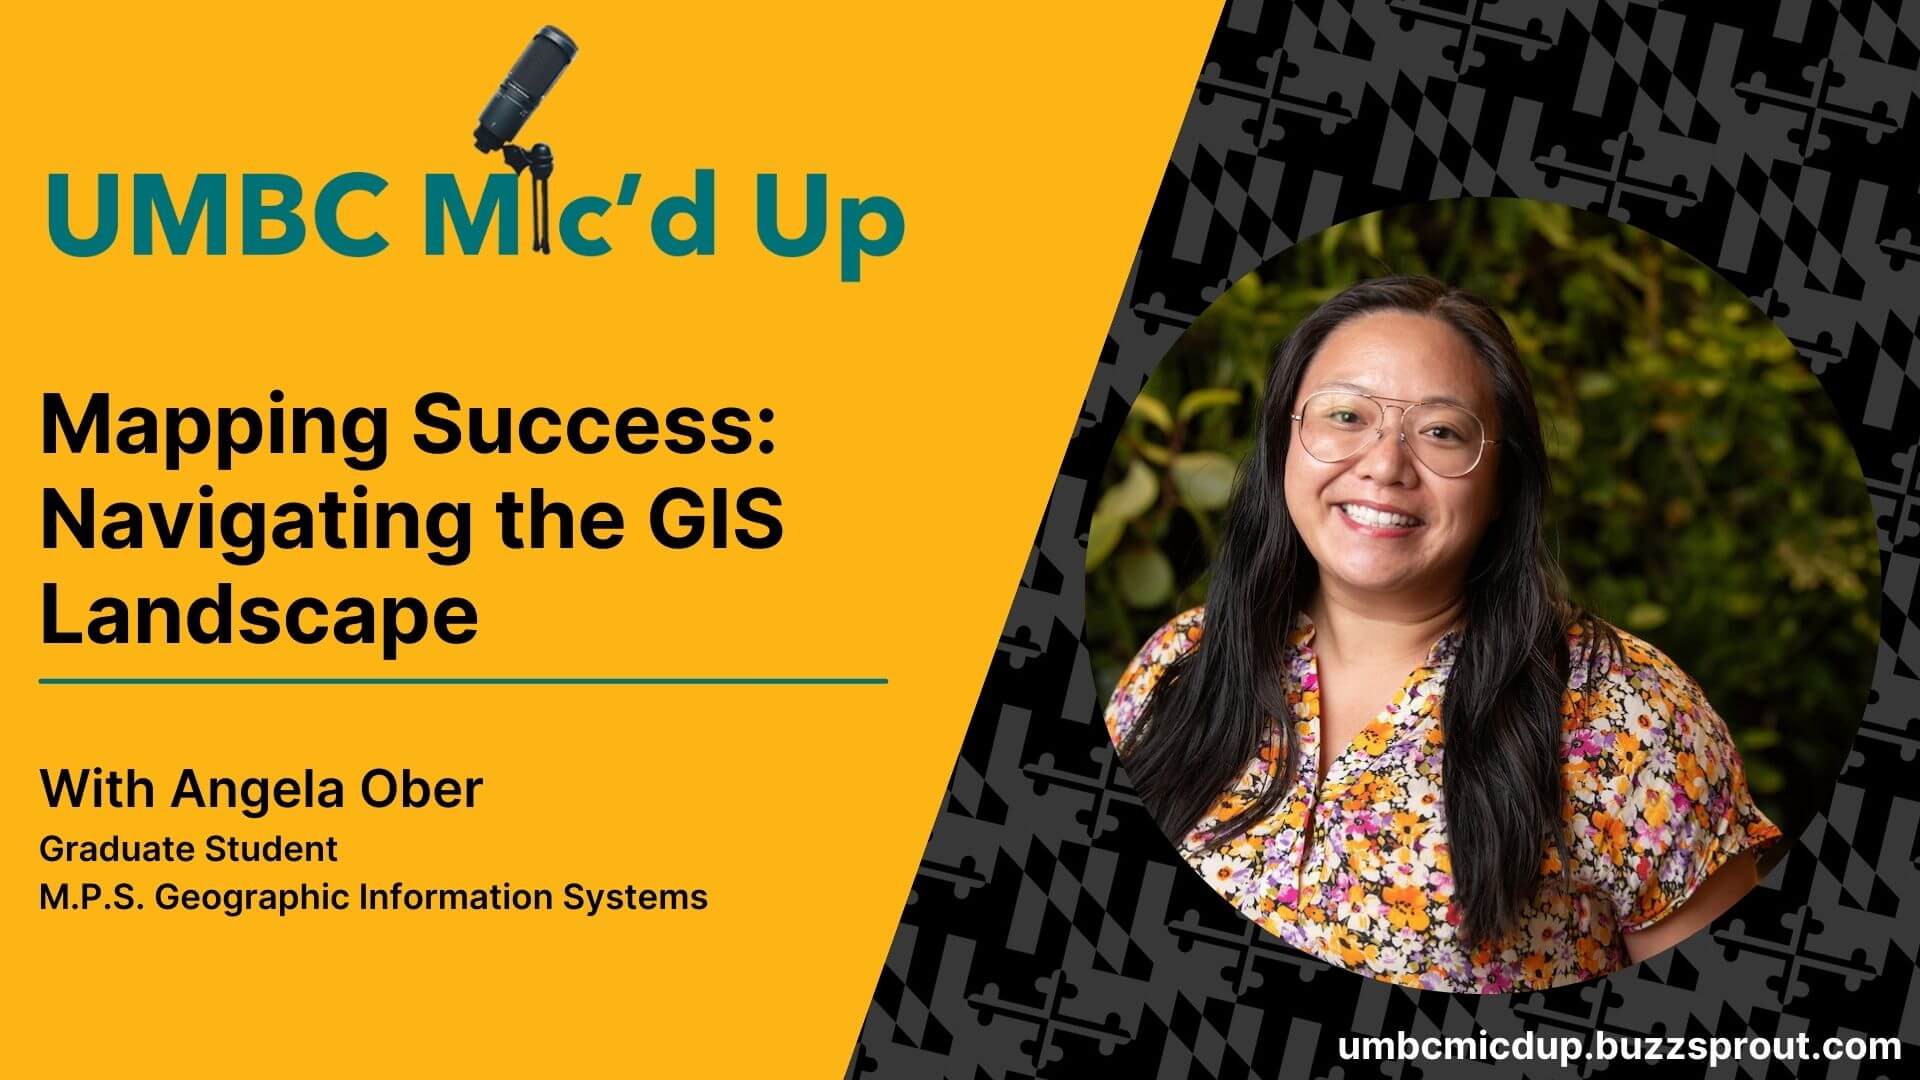 Angela Per is Mapping Success in GIS. She shares her story in UMBC's Mic'd Up Podcast.